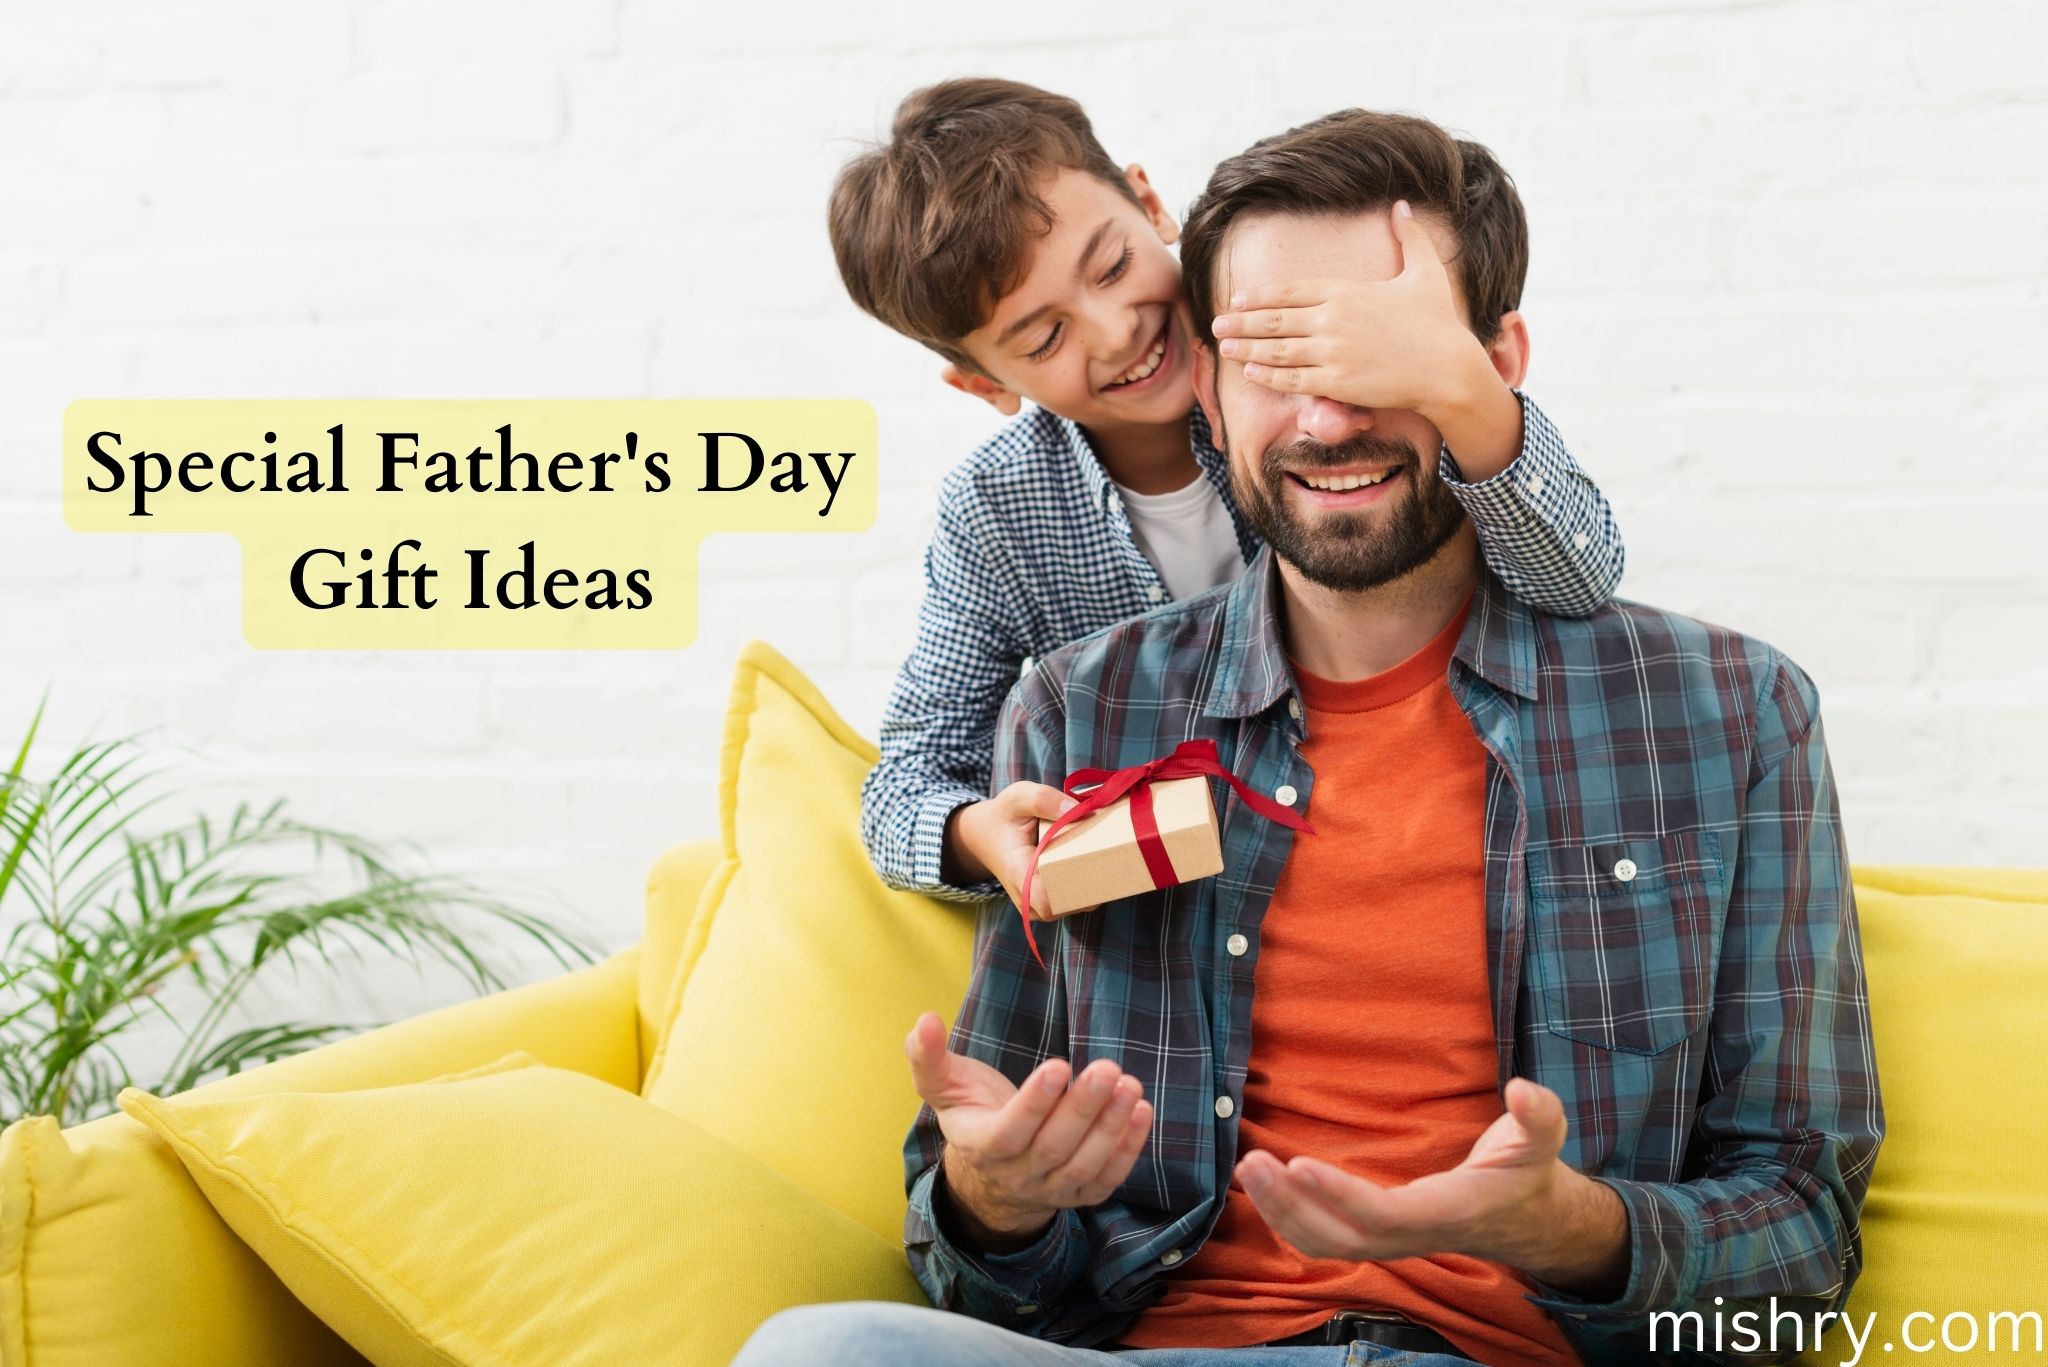 Special Father's Day Gift Ideas